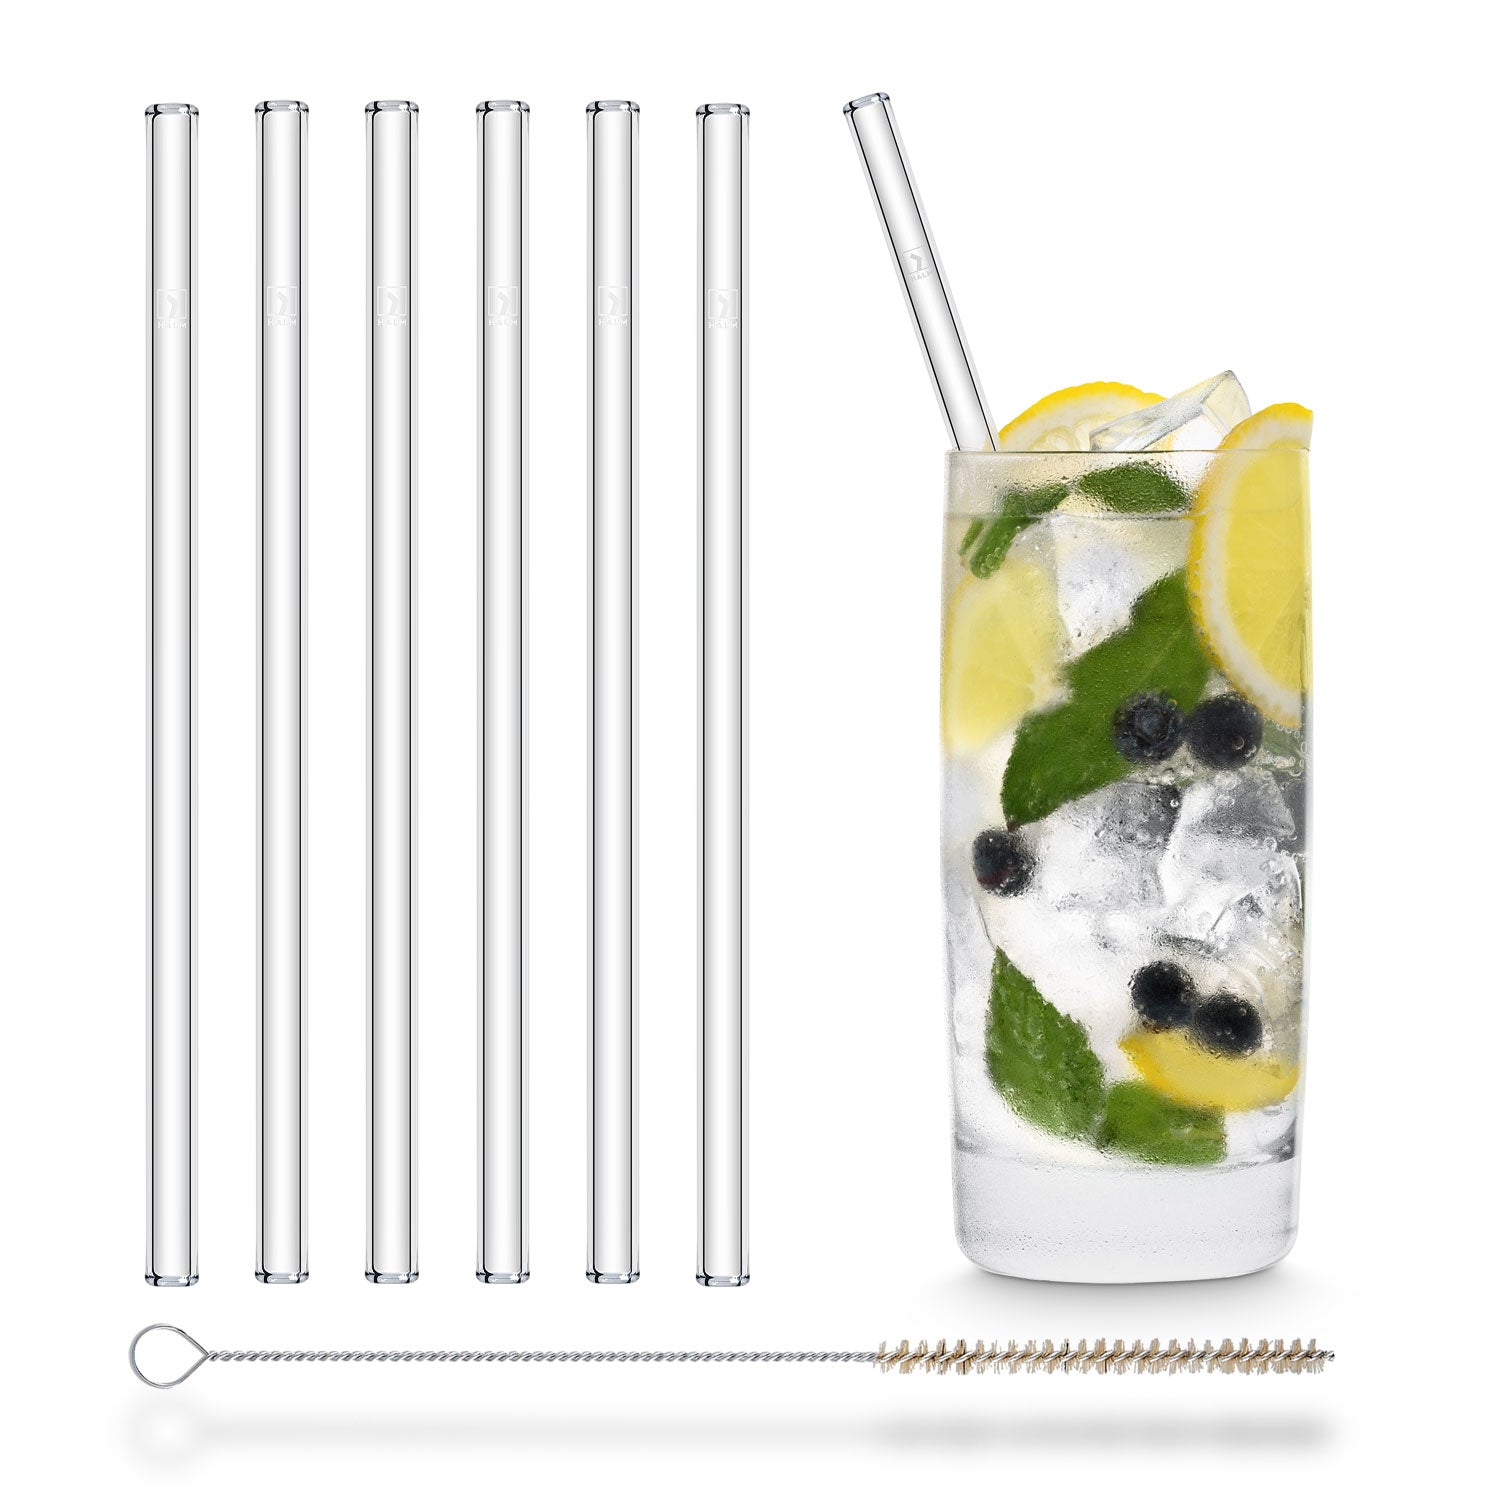 h?lm Halm Glass Straws - 6 Reusable Drinking Straws + Plastic-Free Cleaning Brush - Made in Germany - Dishwasher Safe - 20 cm (8 in)